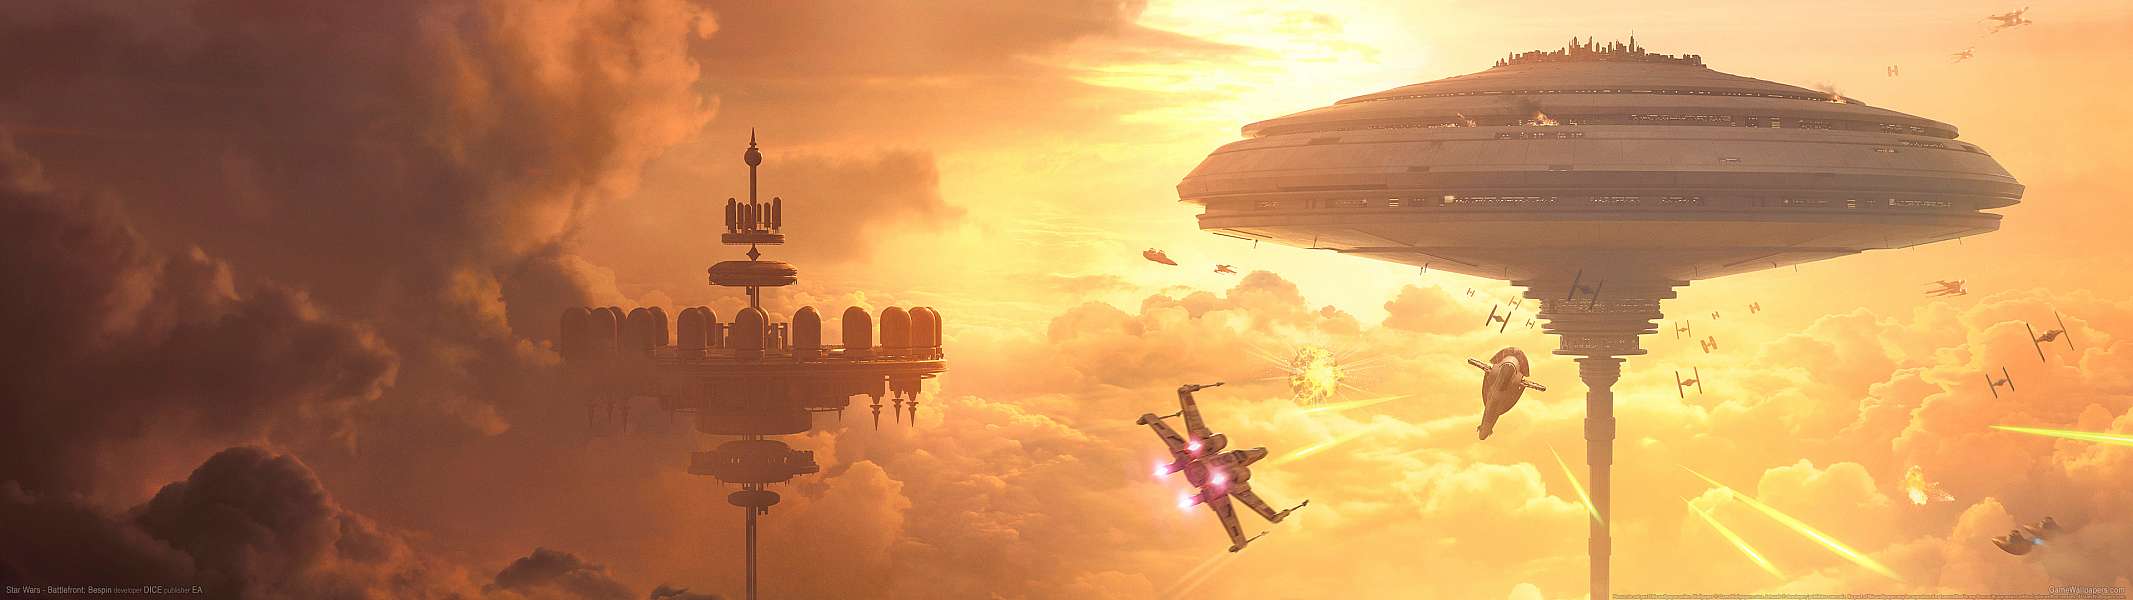 Star Wars - Battlefront: Bespin dual screen wallpaper or background